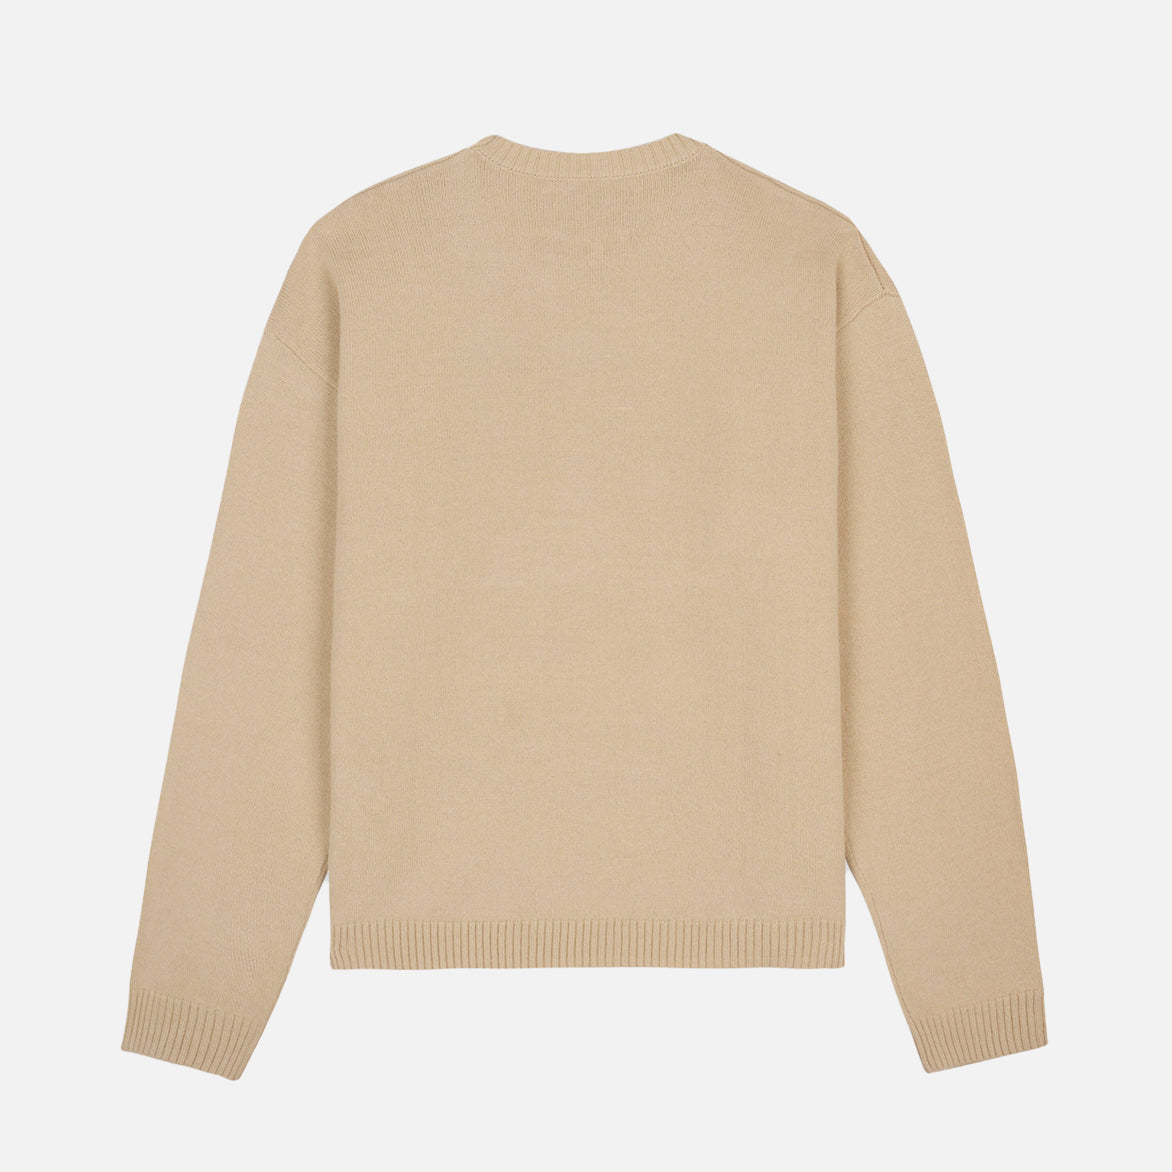 SPRAY CAN SWEATER - NATURAL